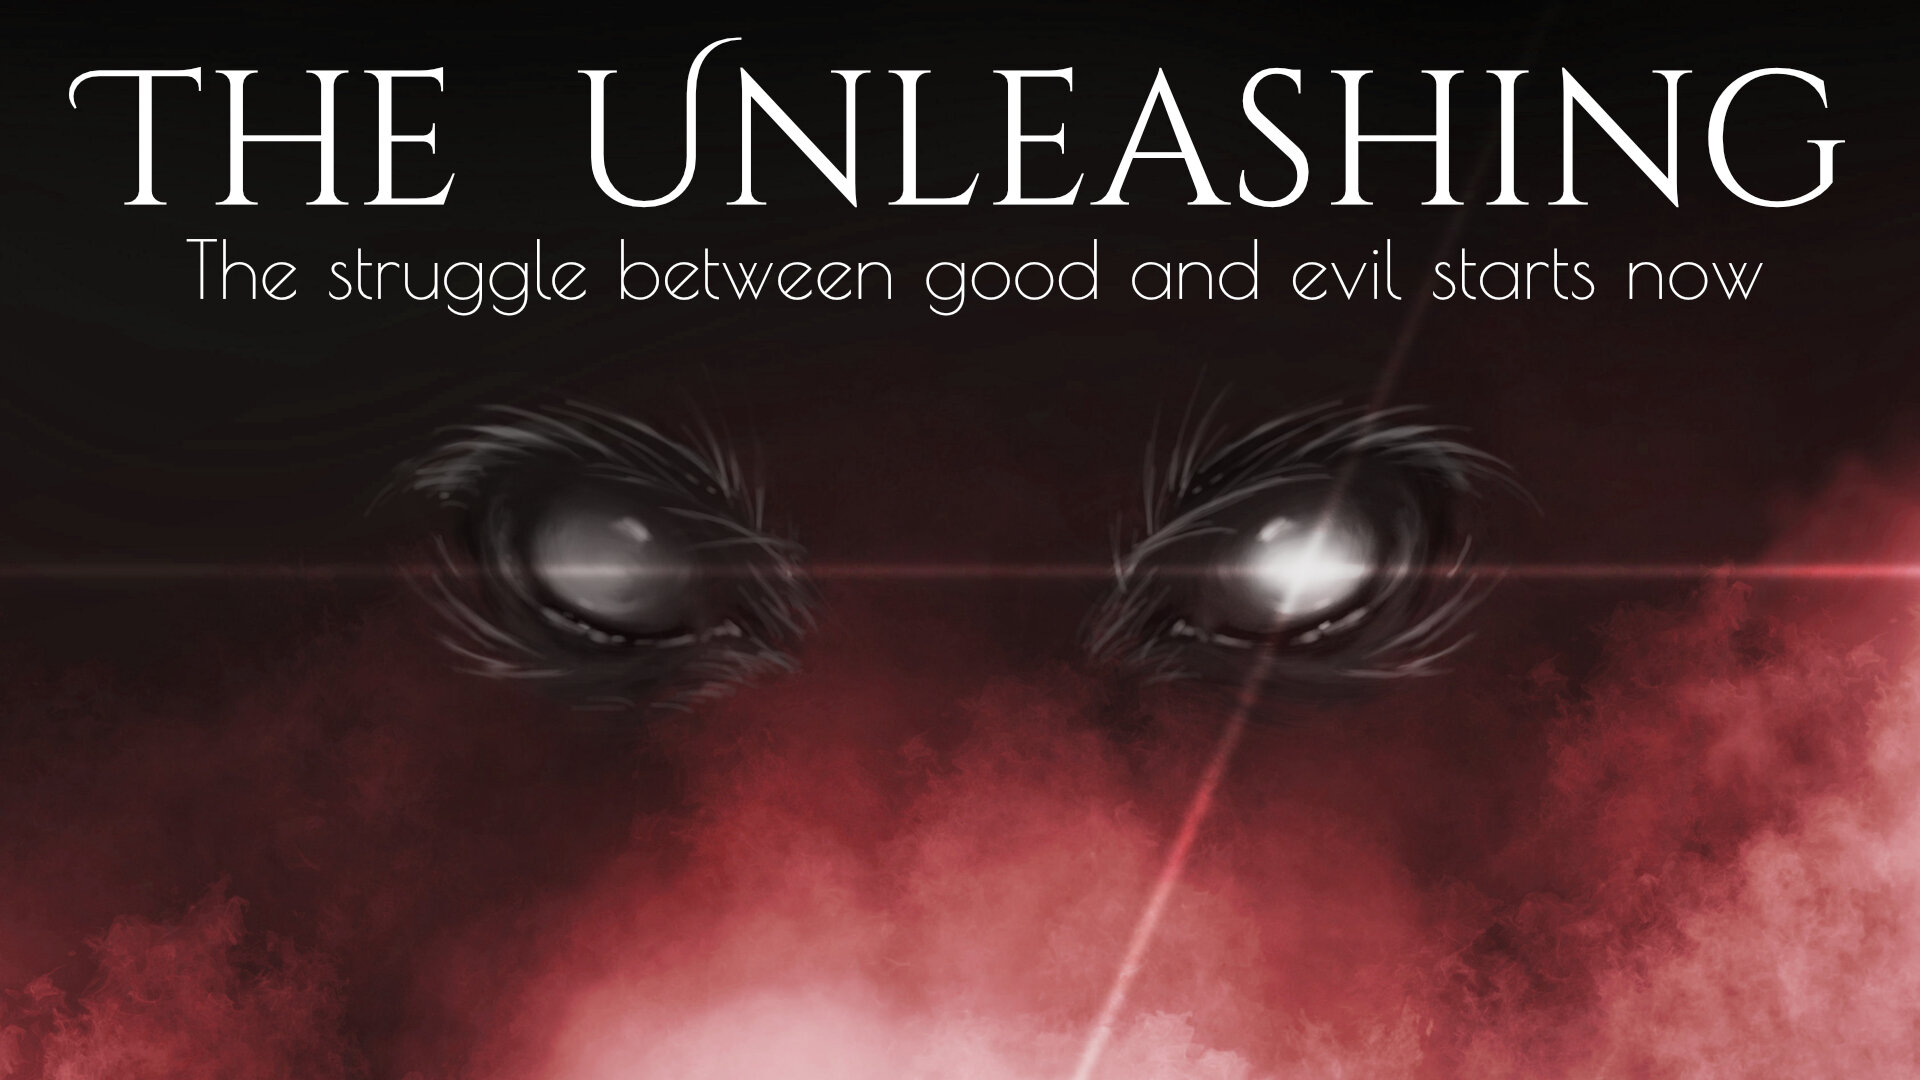 "The Unleashing" Podcast, Audiobook, Screenplay, Soundtrack